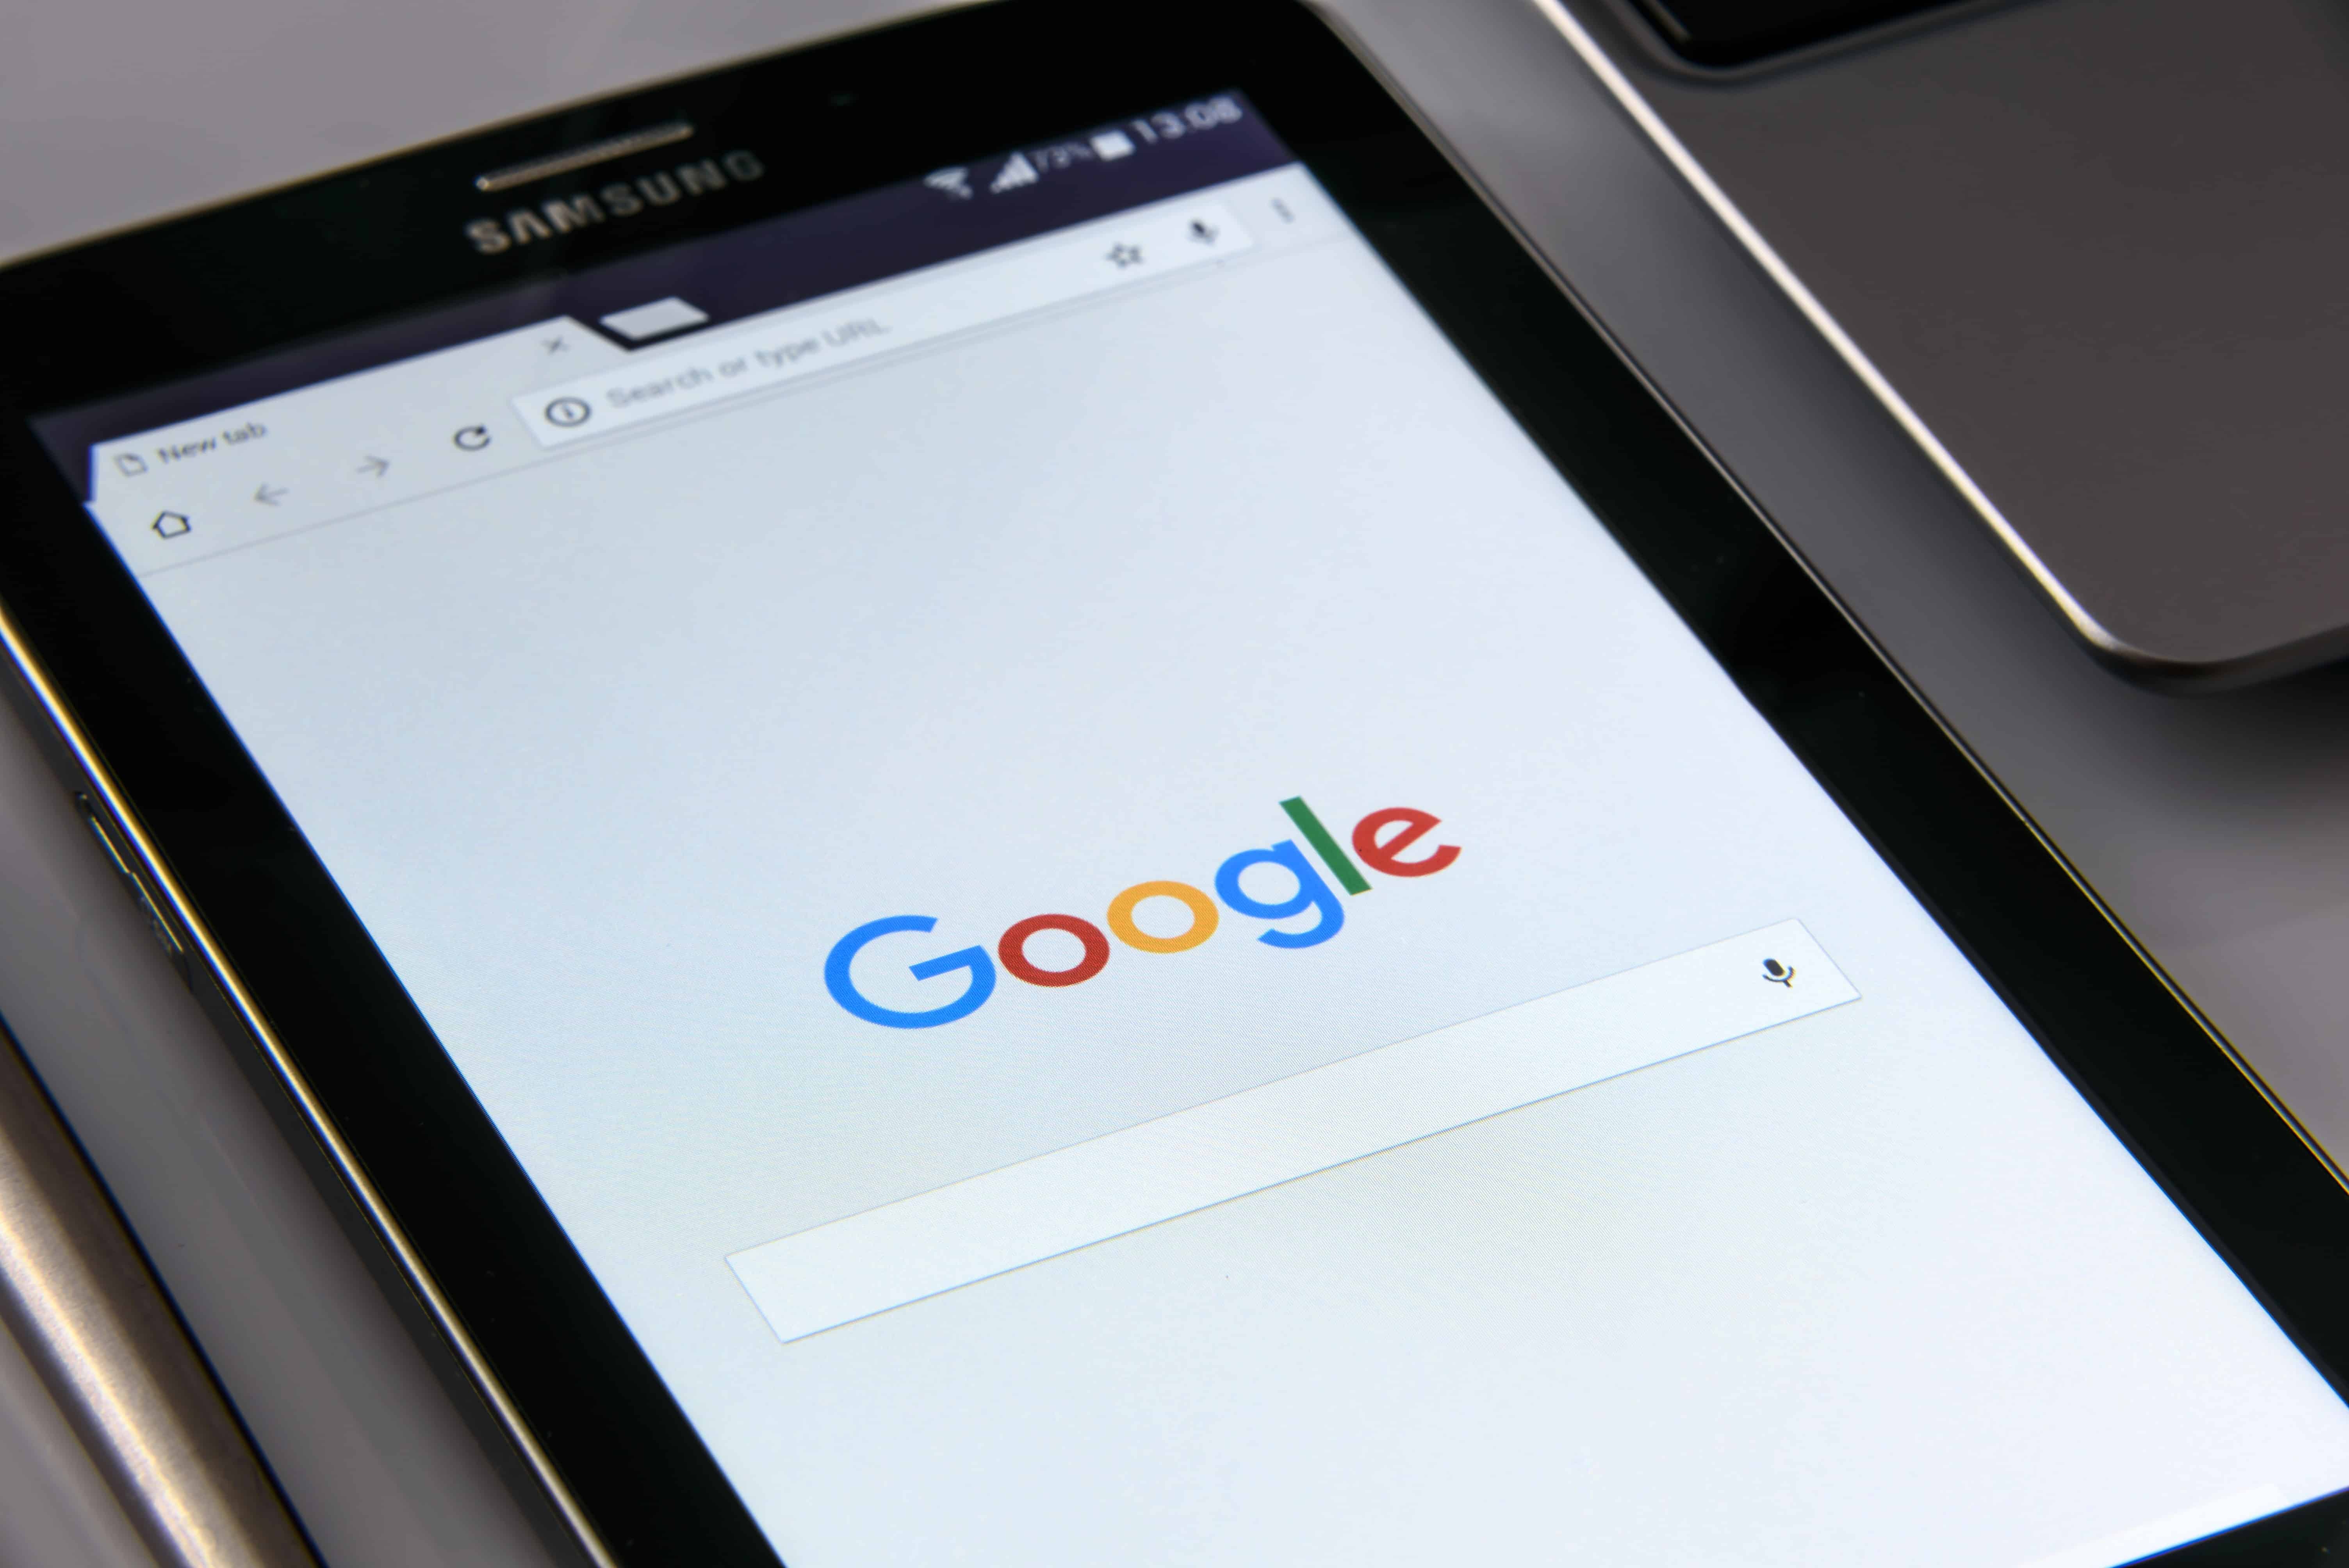 SEO Agency Tips: How to rank your business on Google in 2019?